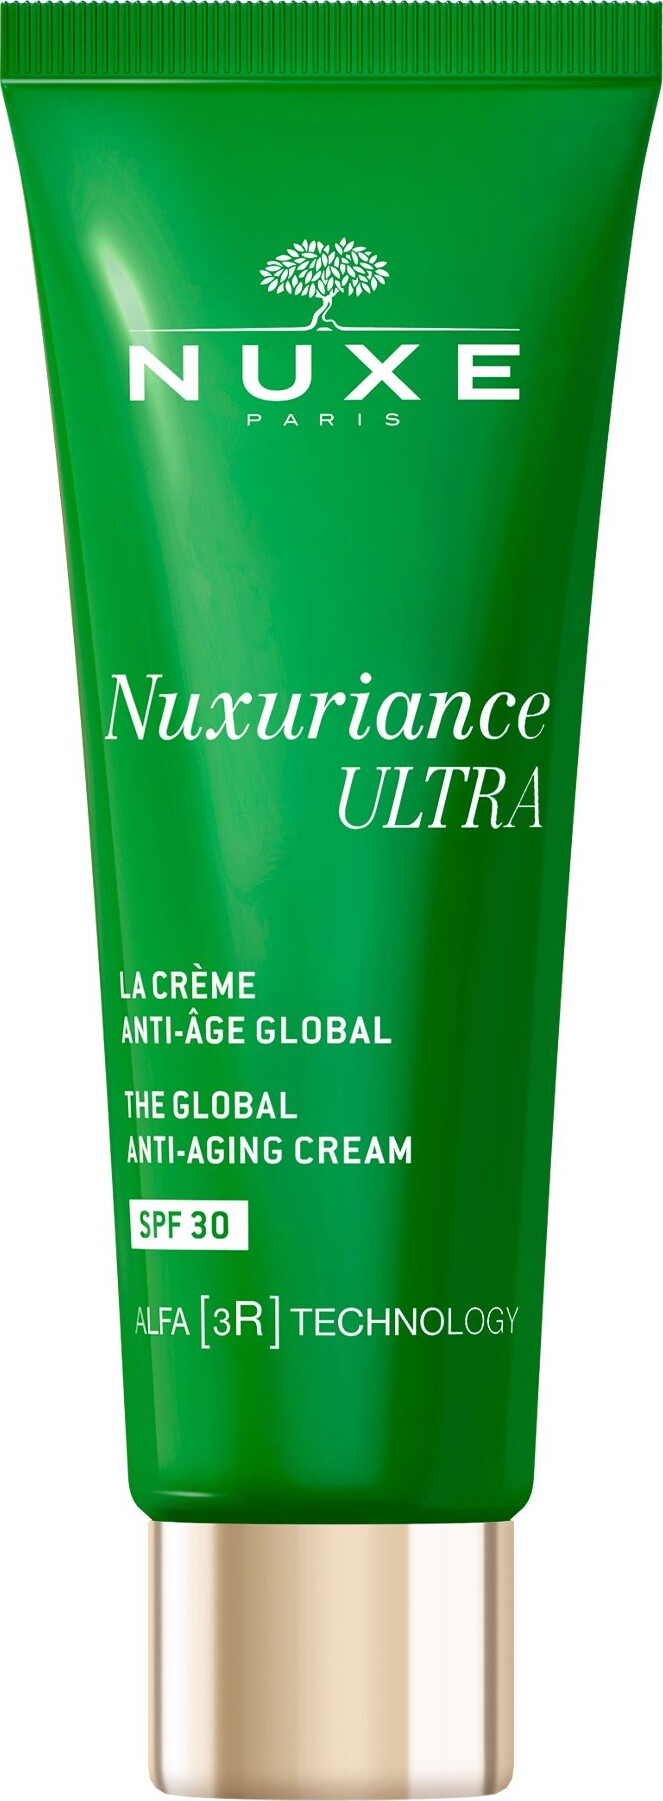 Se Nuxe - Nuxuriance Ultra - Spf30 Day Cream 50 Ml hos Gucca.dk